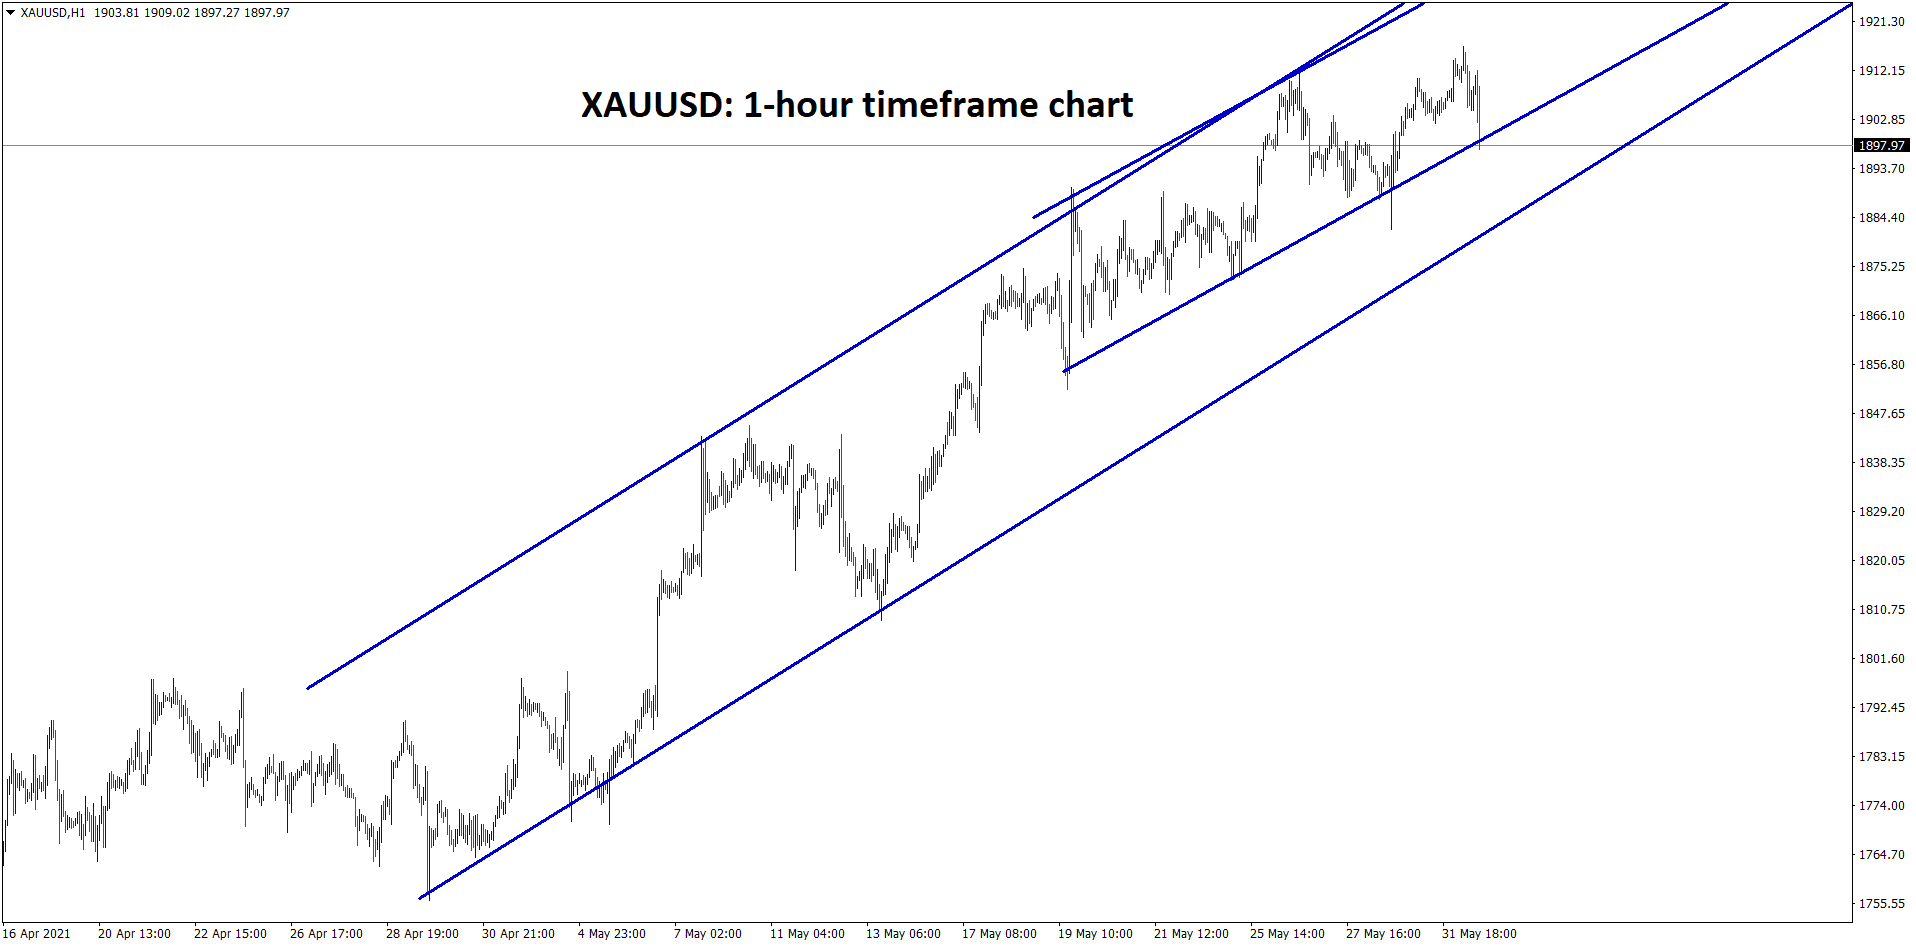 Gold XAUUSD is making a correction from the top resistance zone